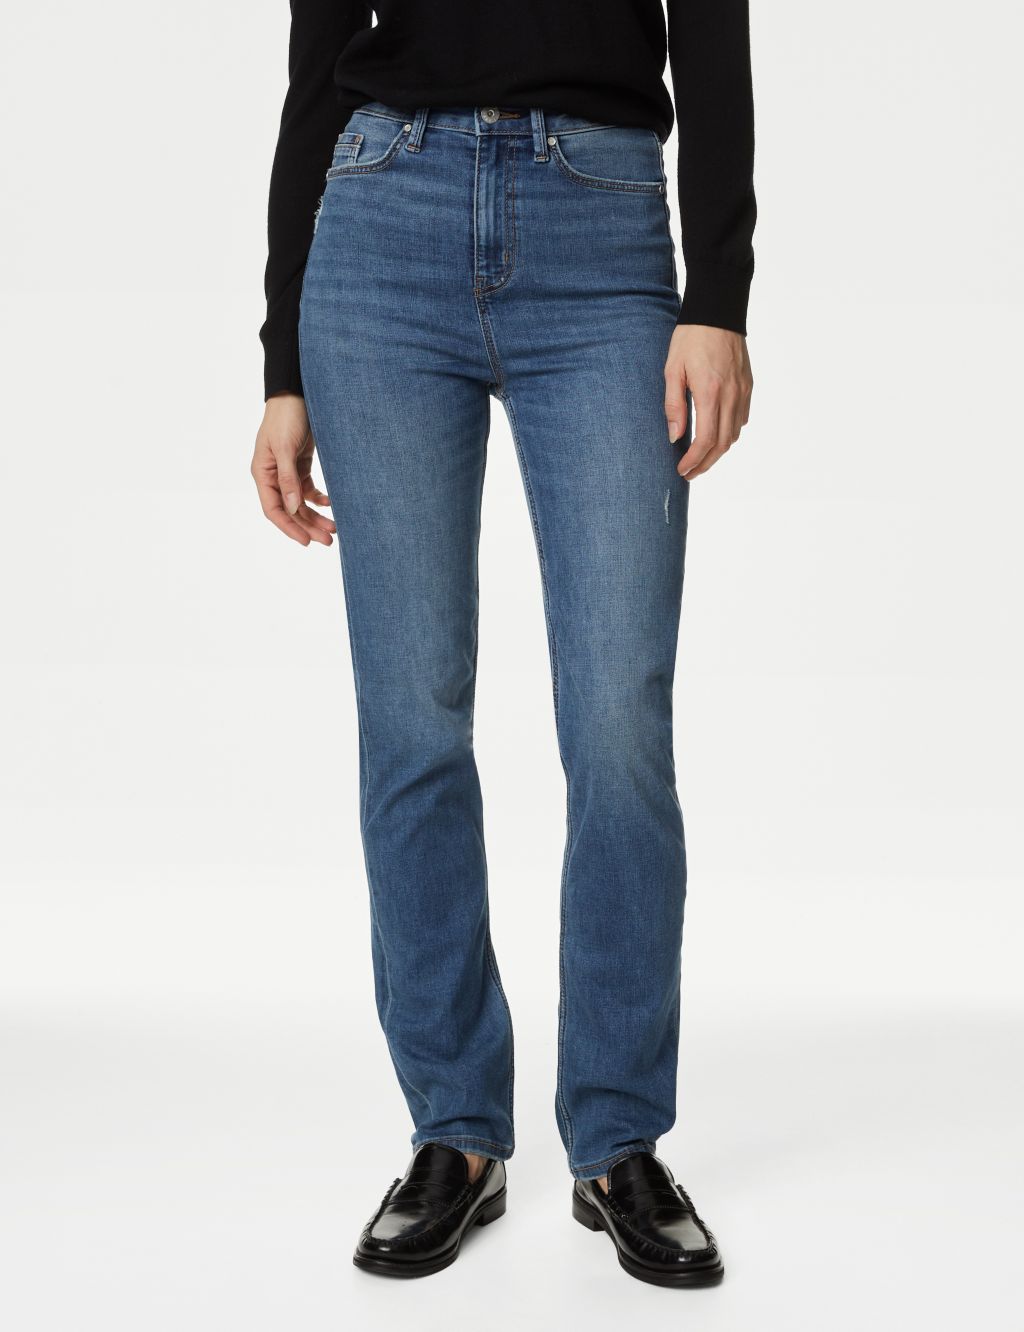 Sienna Supersoft Straight Leg Jeans image 3